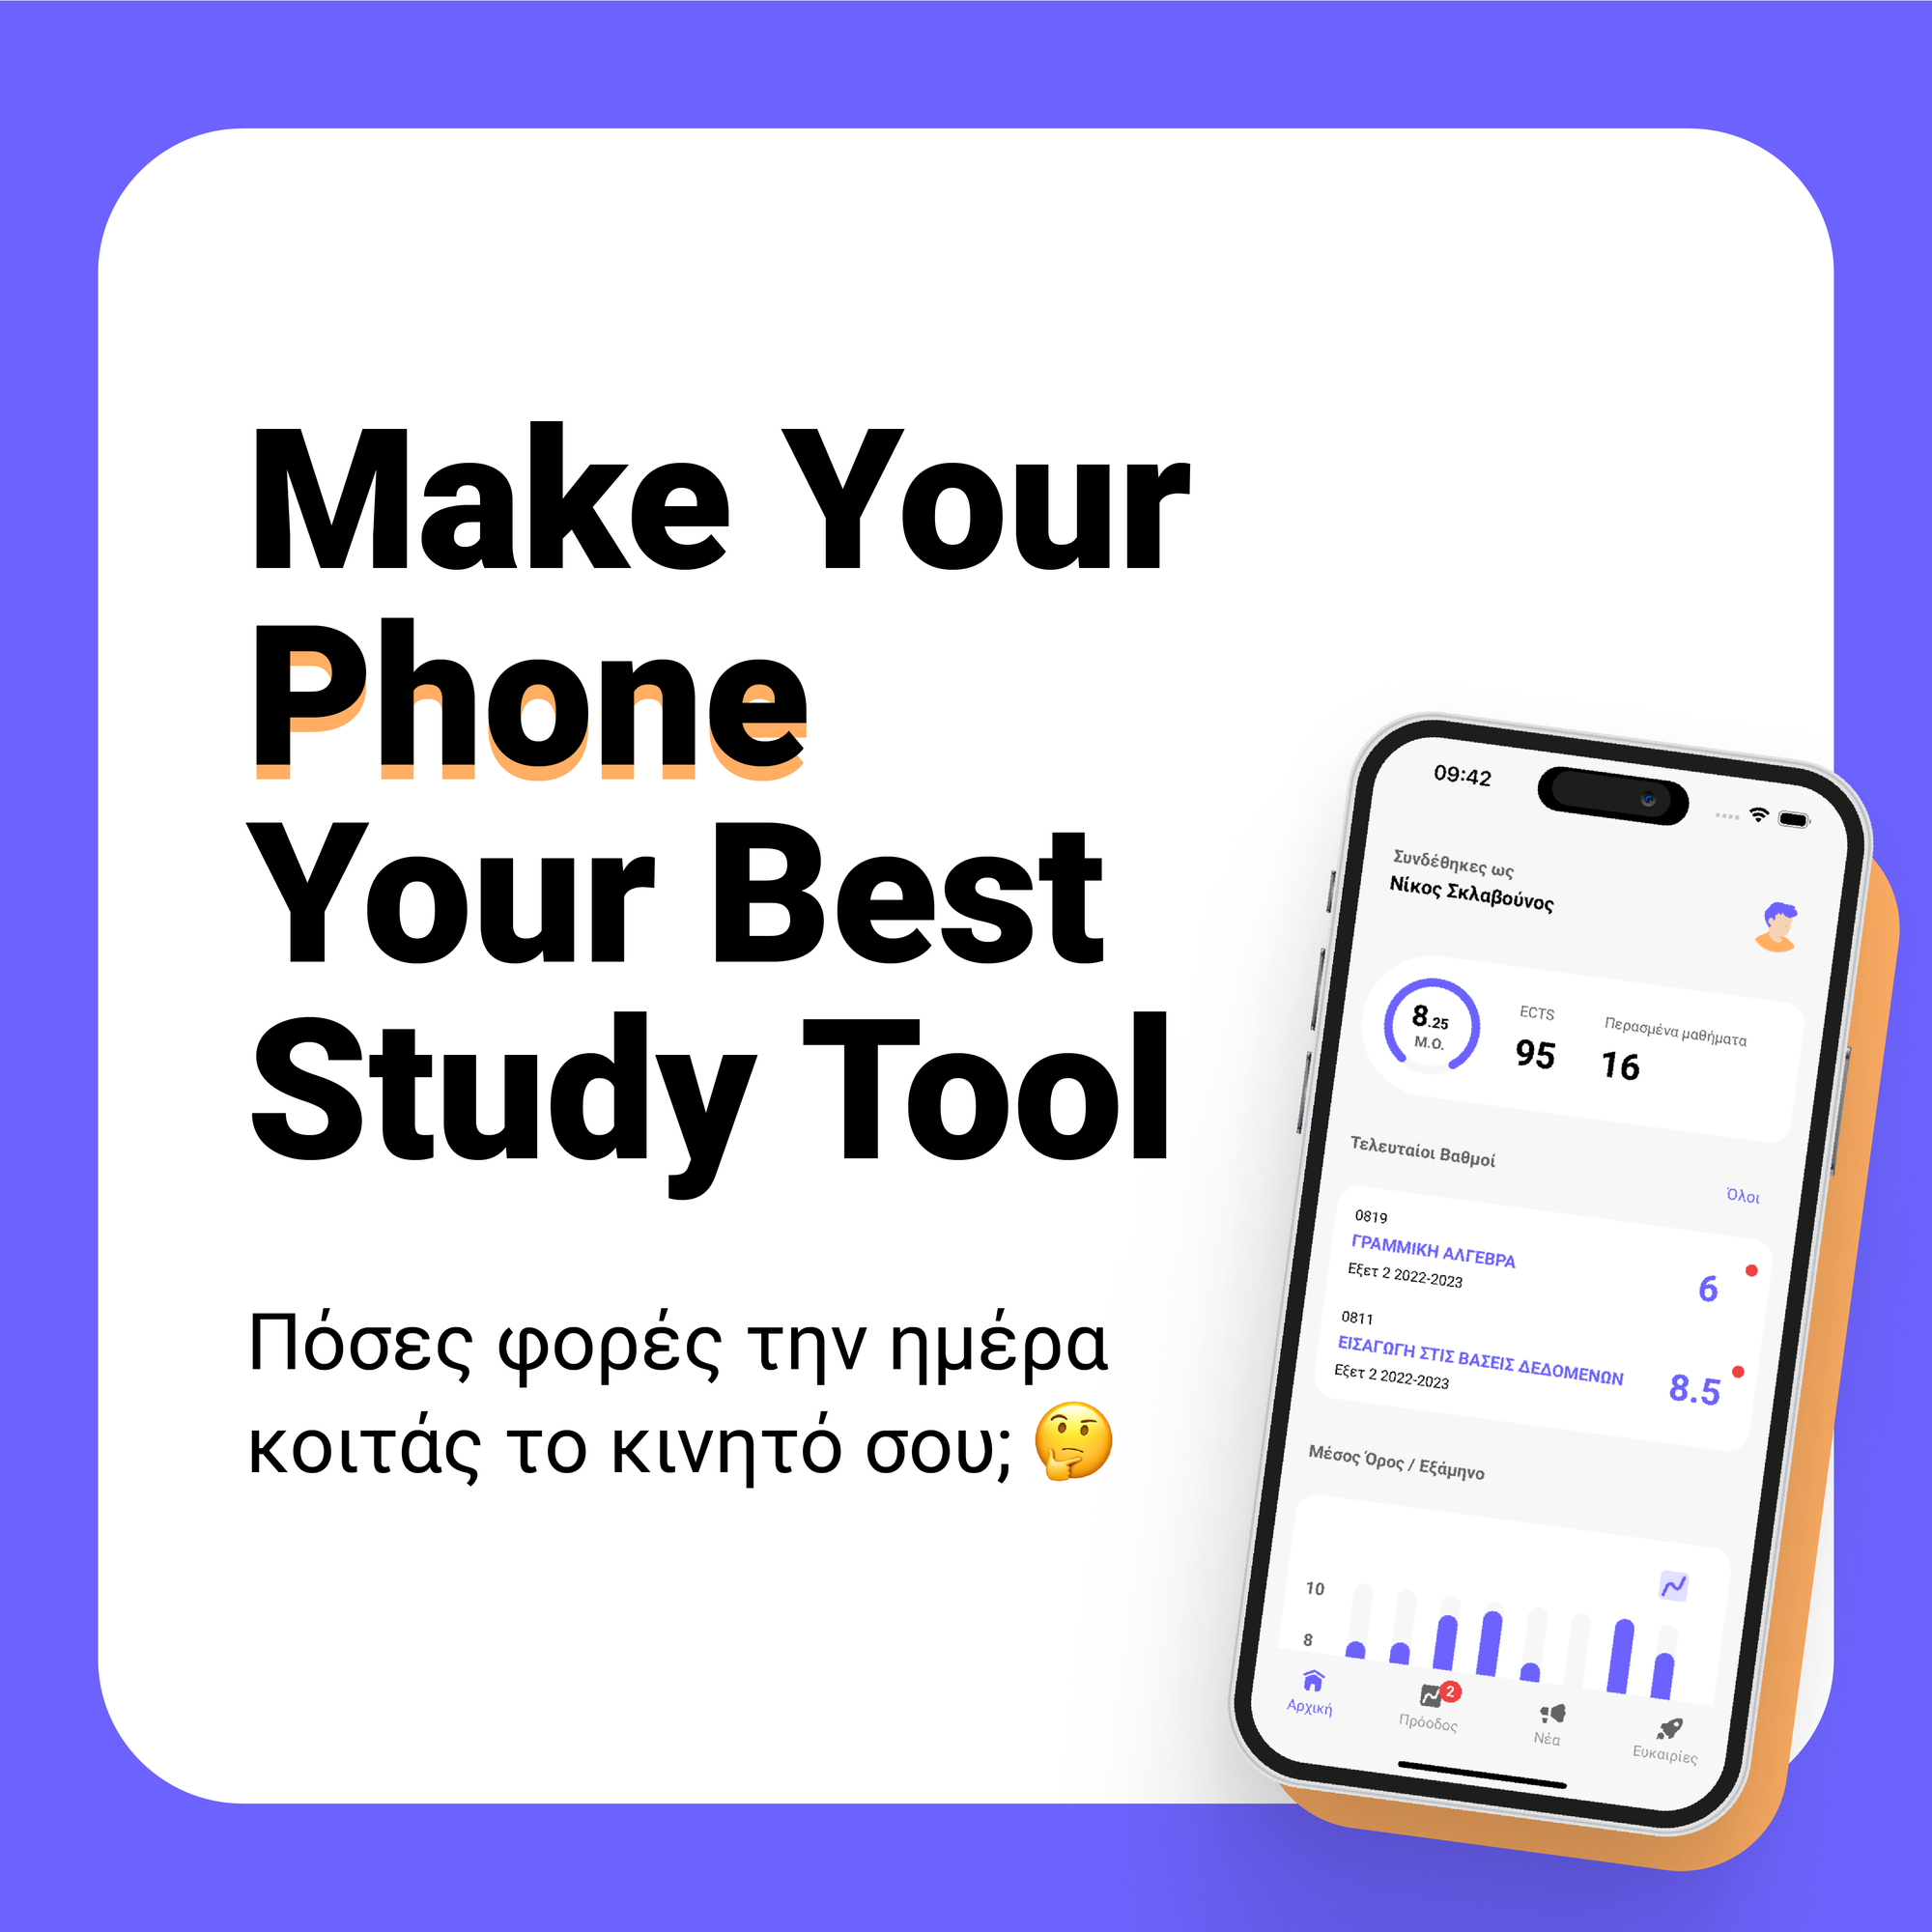 Make Your Phone Your Best Study Tool